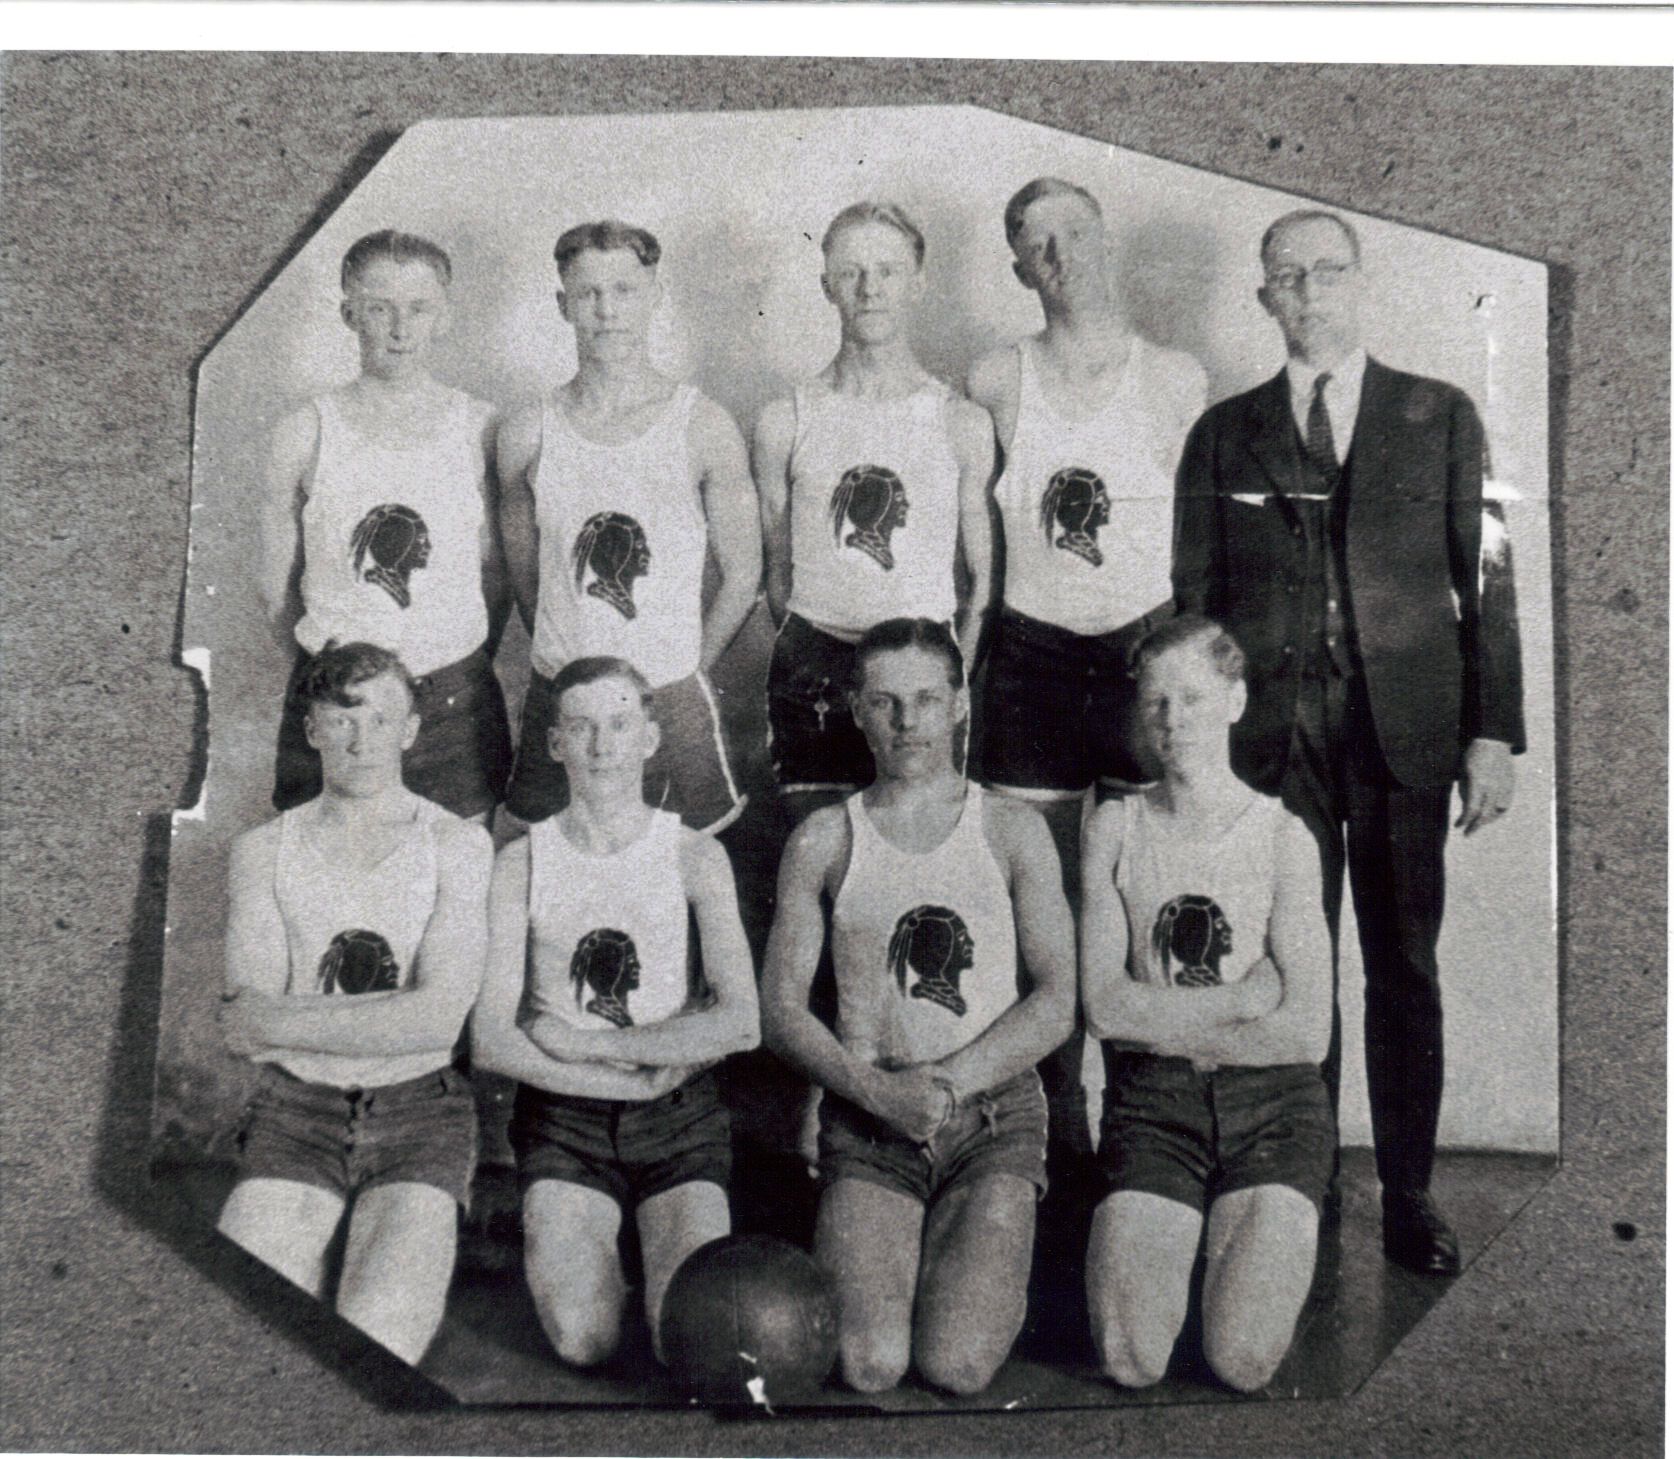 The Superior, Wisconsin, YMCA Men's basketball team from either 1923 or 1924. My grandfather - Floyd E. Anderson - is in the back row, far left.